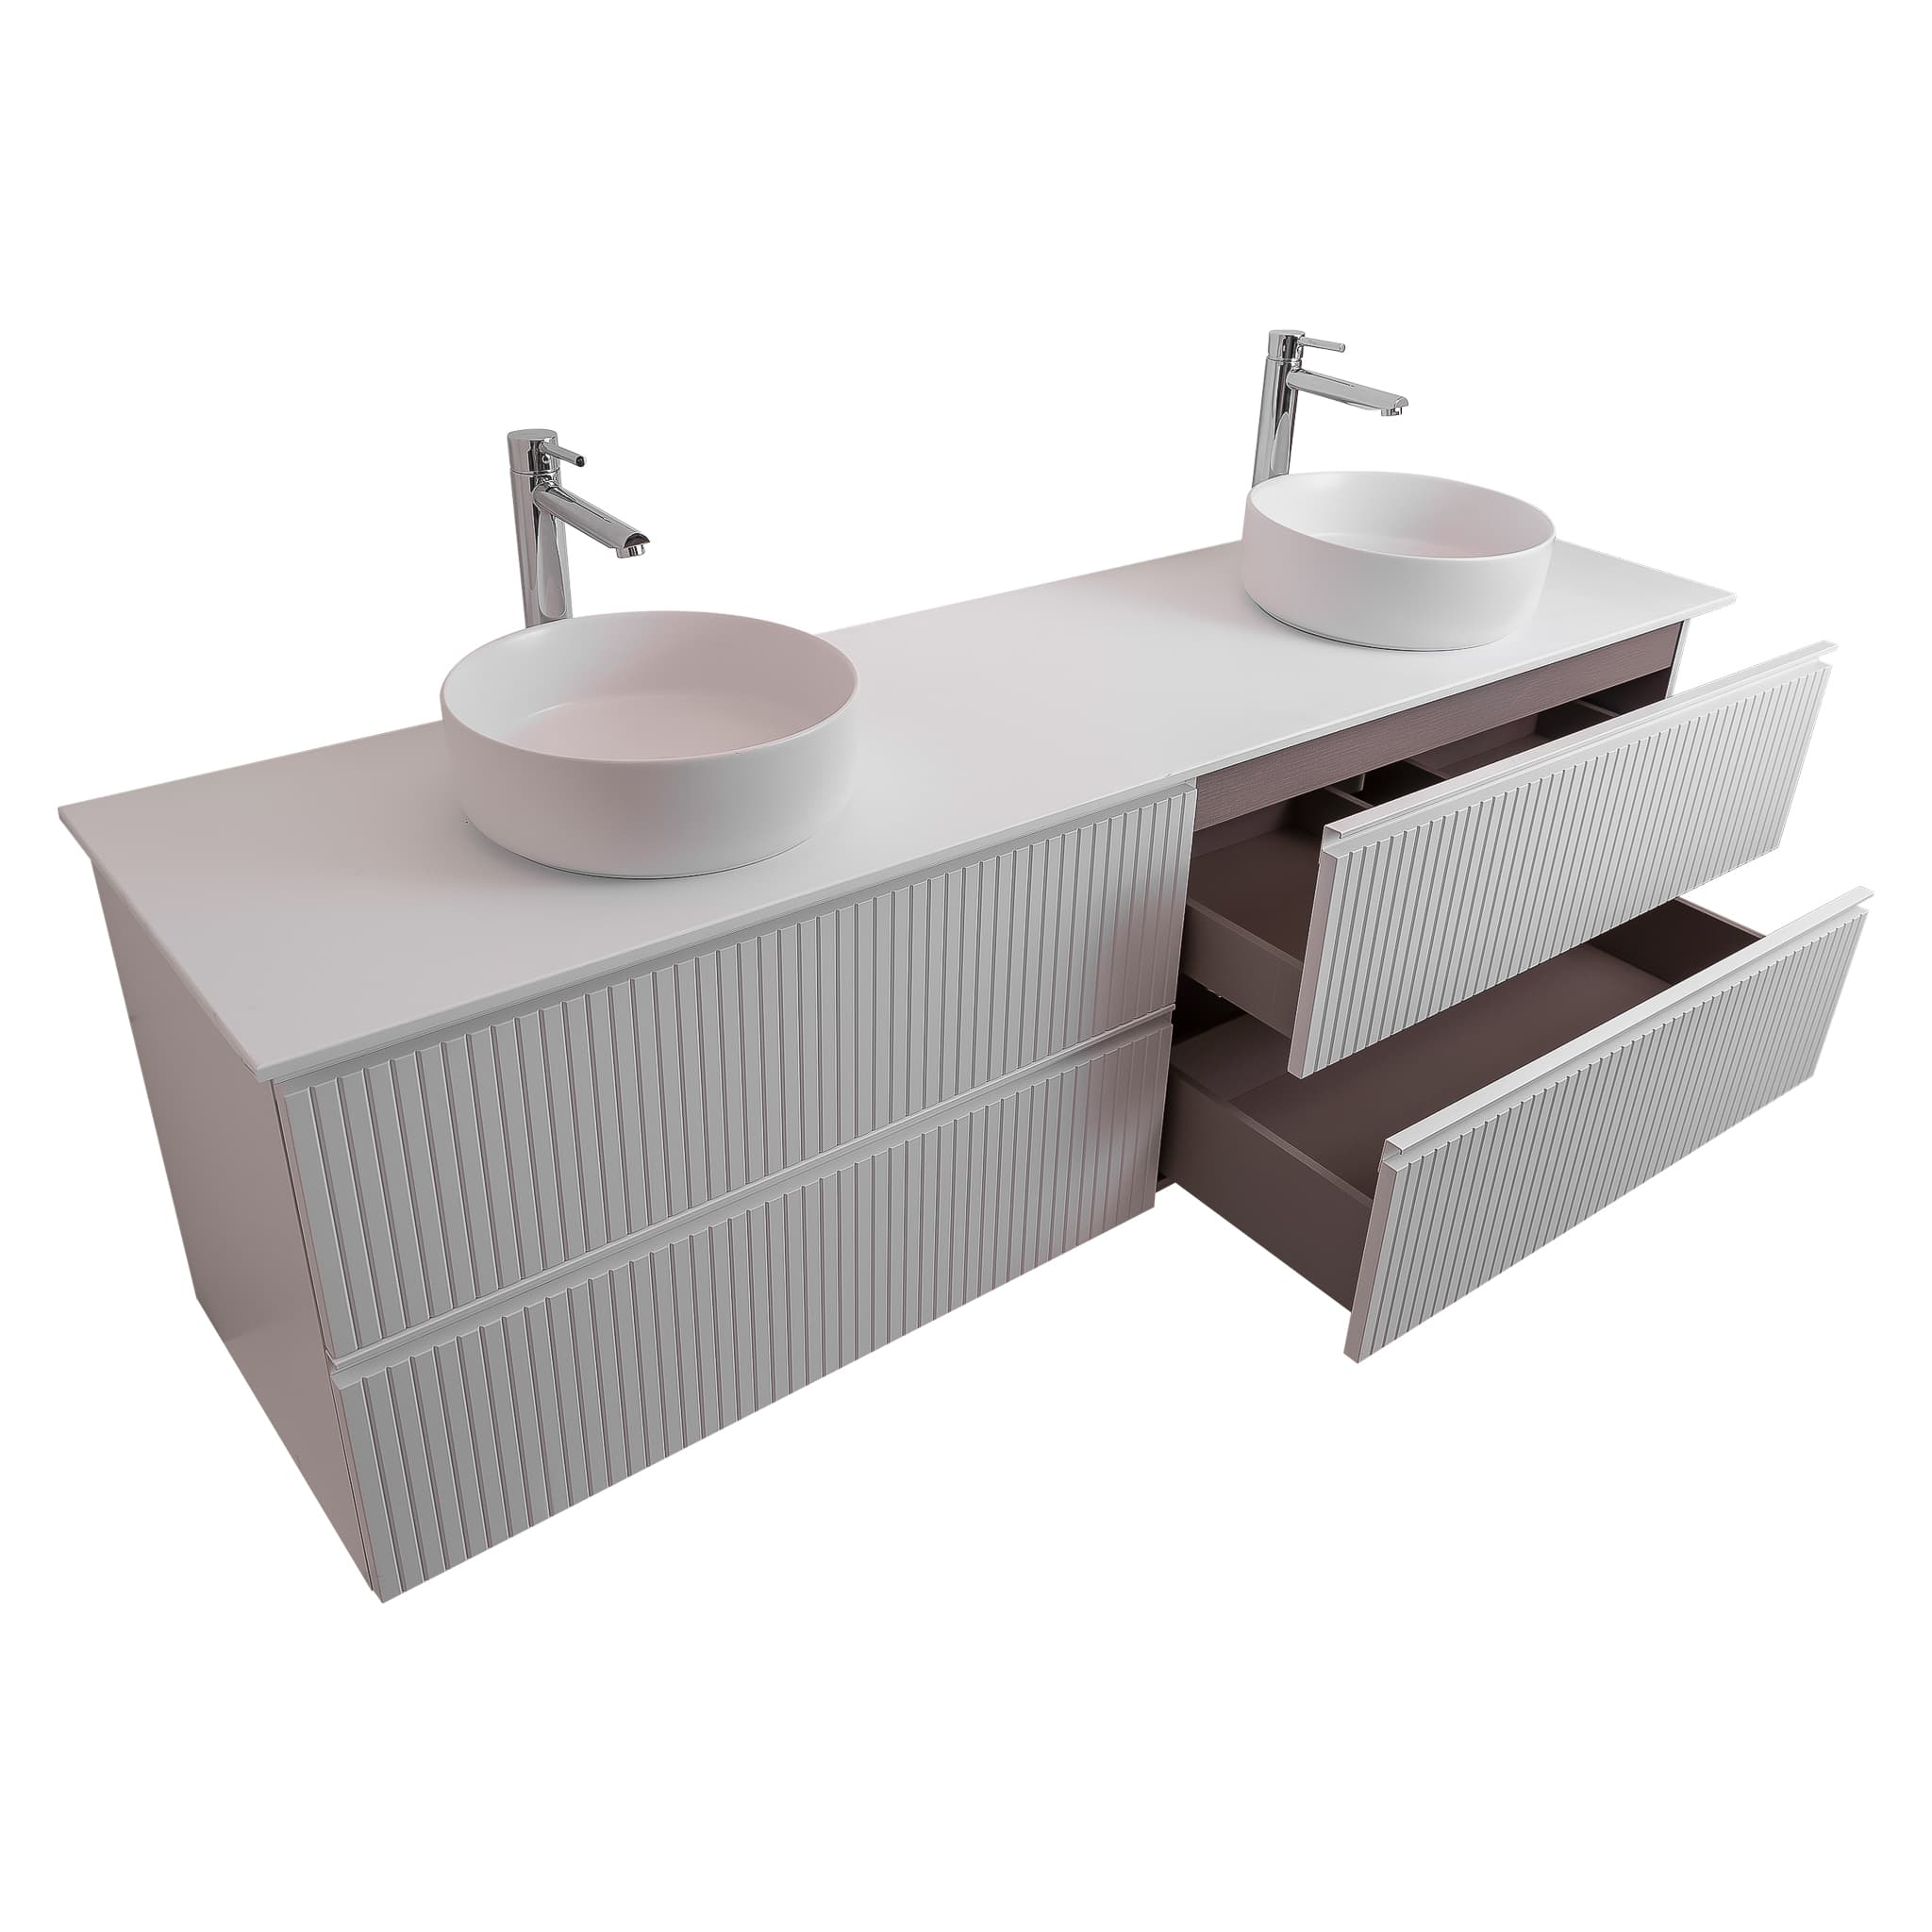 Ares 63 Matte White Cabinet, Ares White Top And Two Ares White Ceramic Basin, Wall Mounted Modern Vanity Set